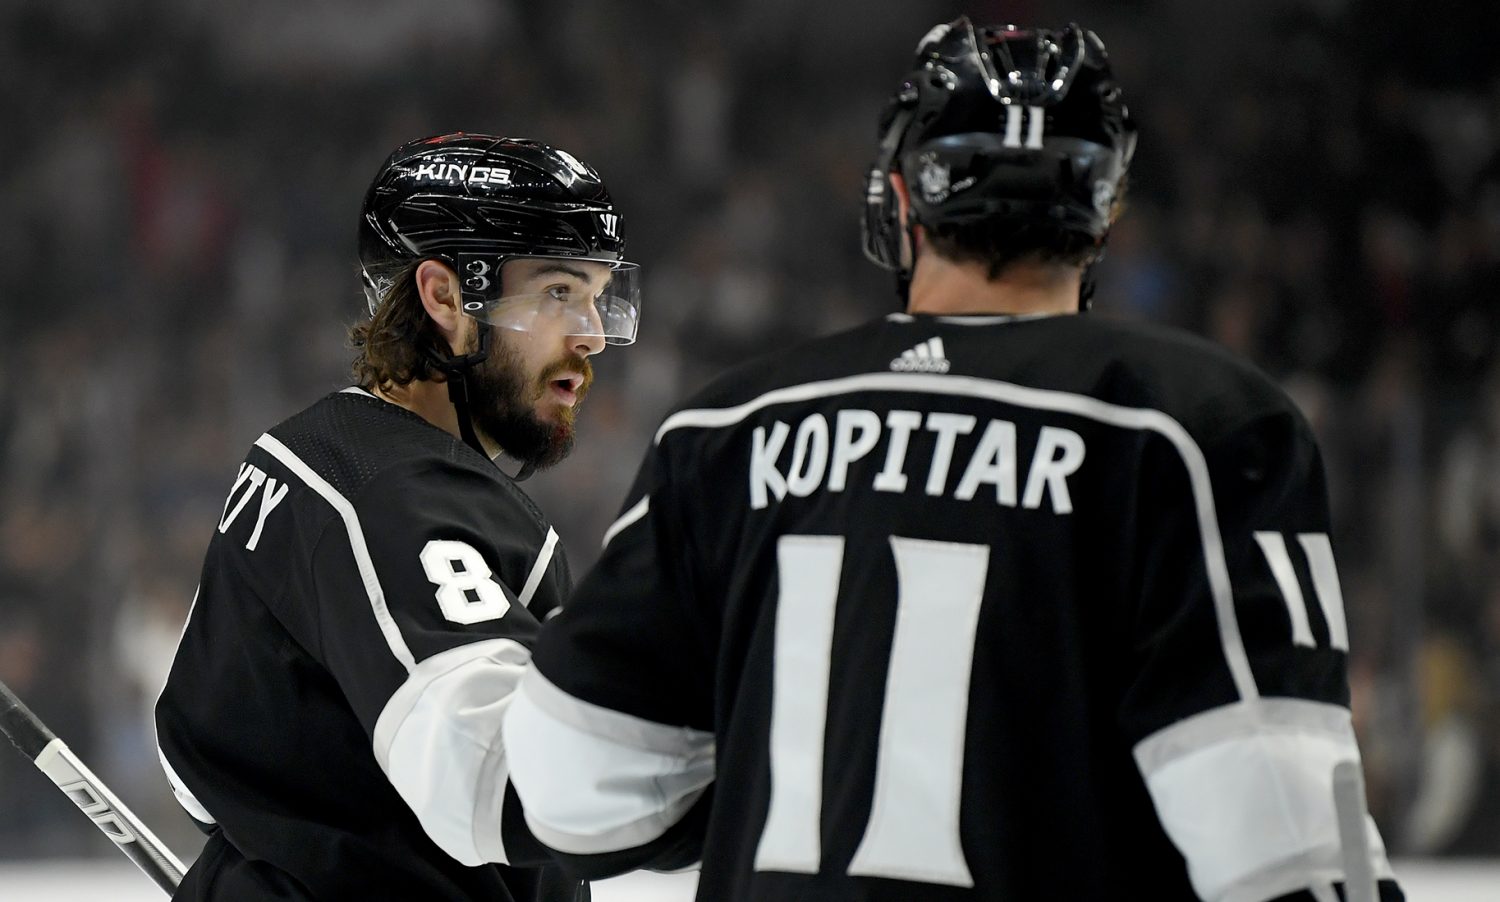 LA Kings Notes: Kings Add New Coach, Defense Shaping Up, Next